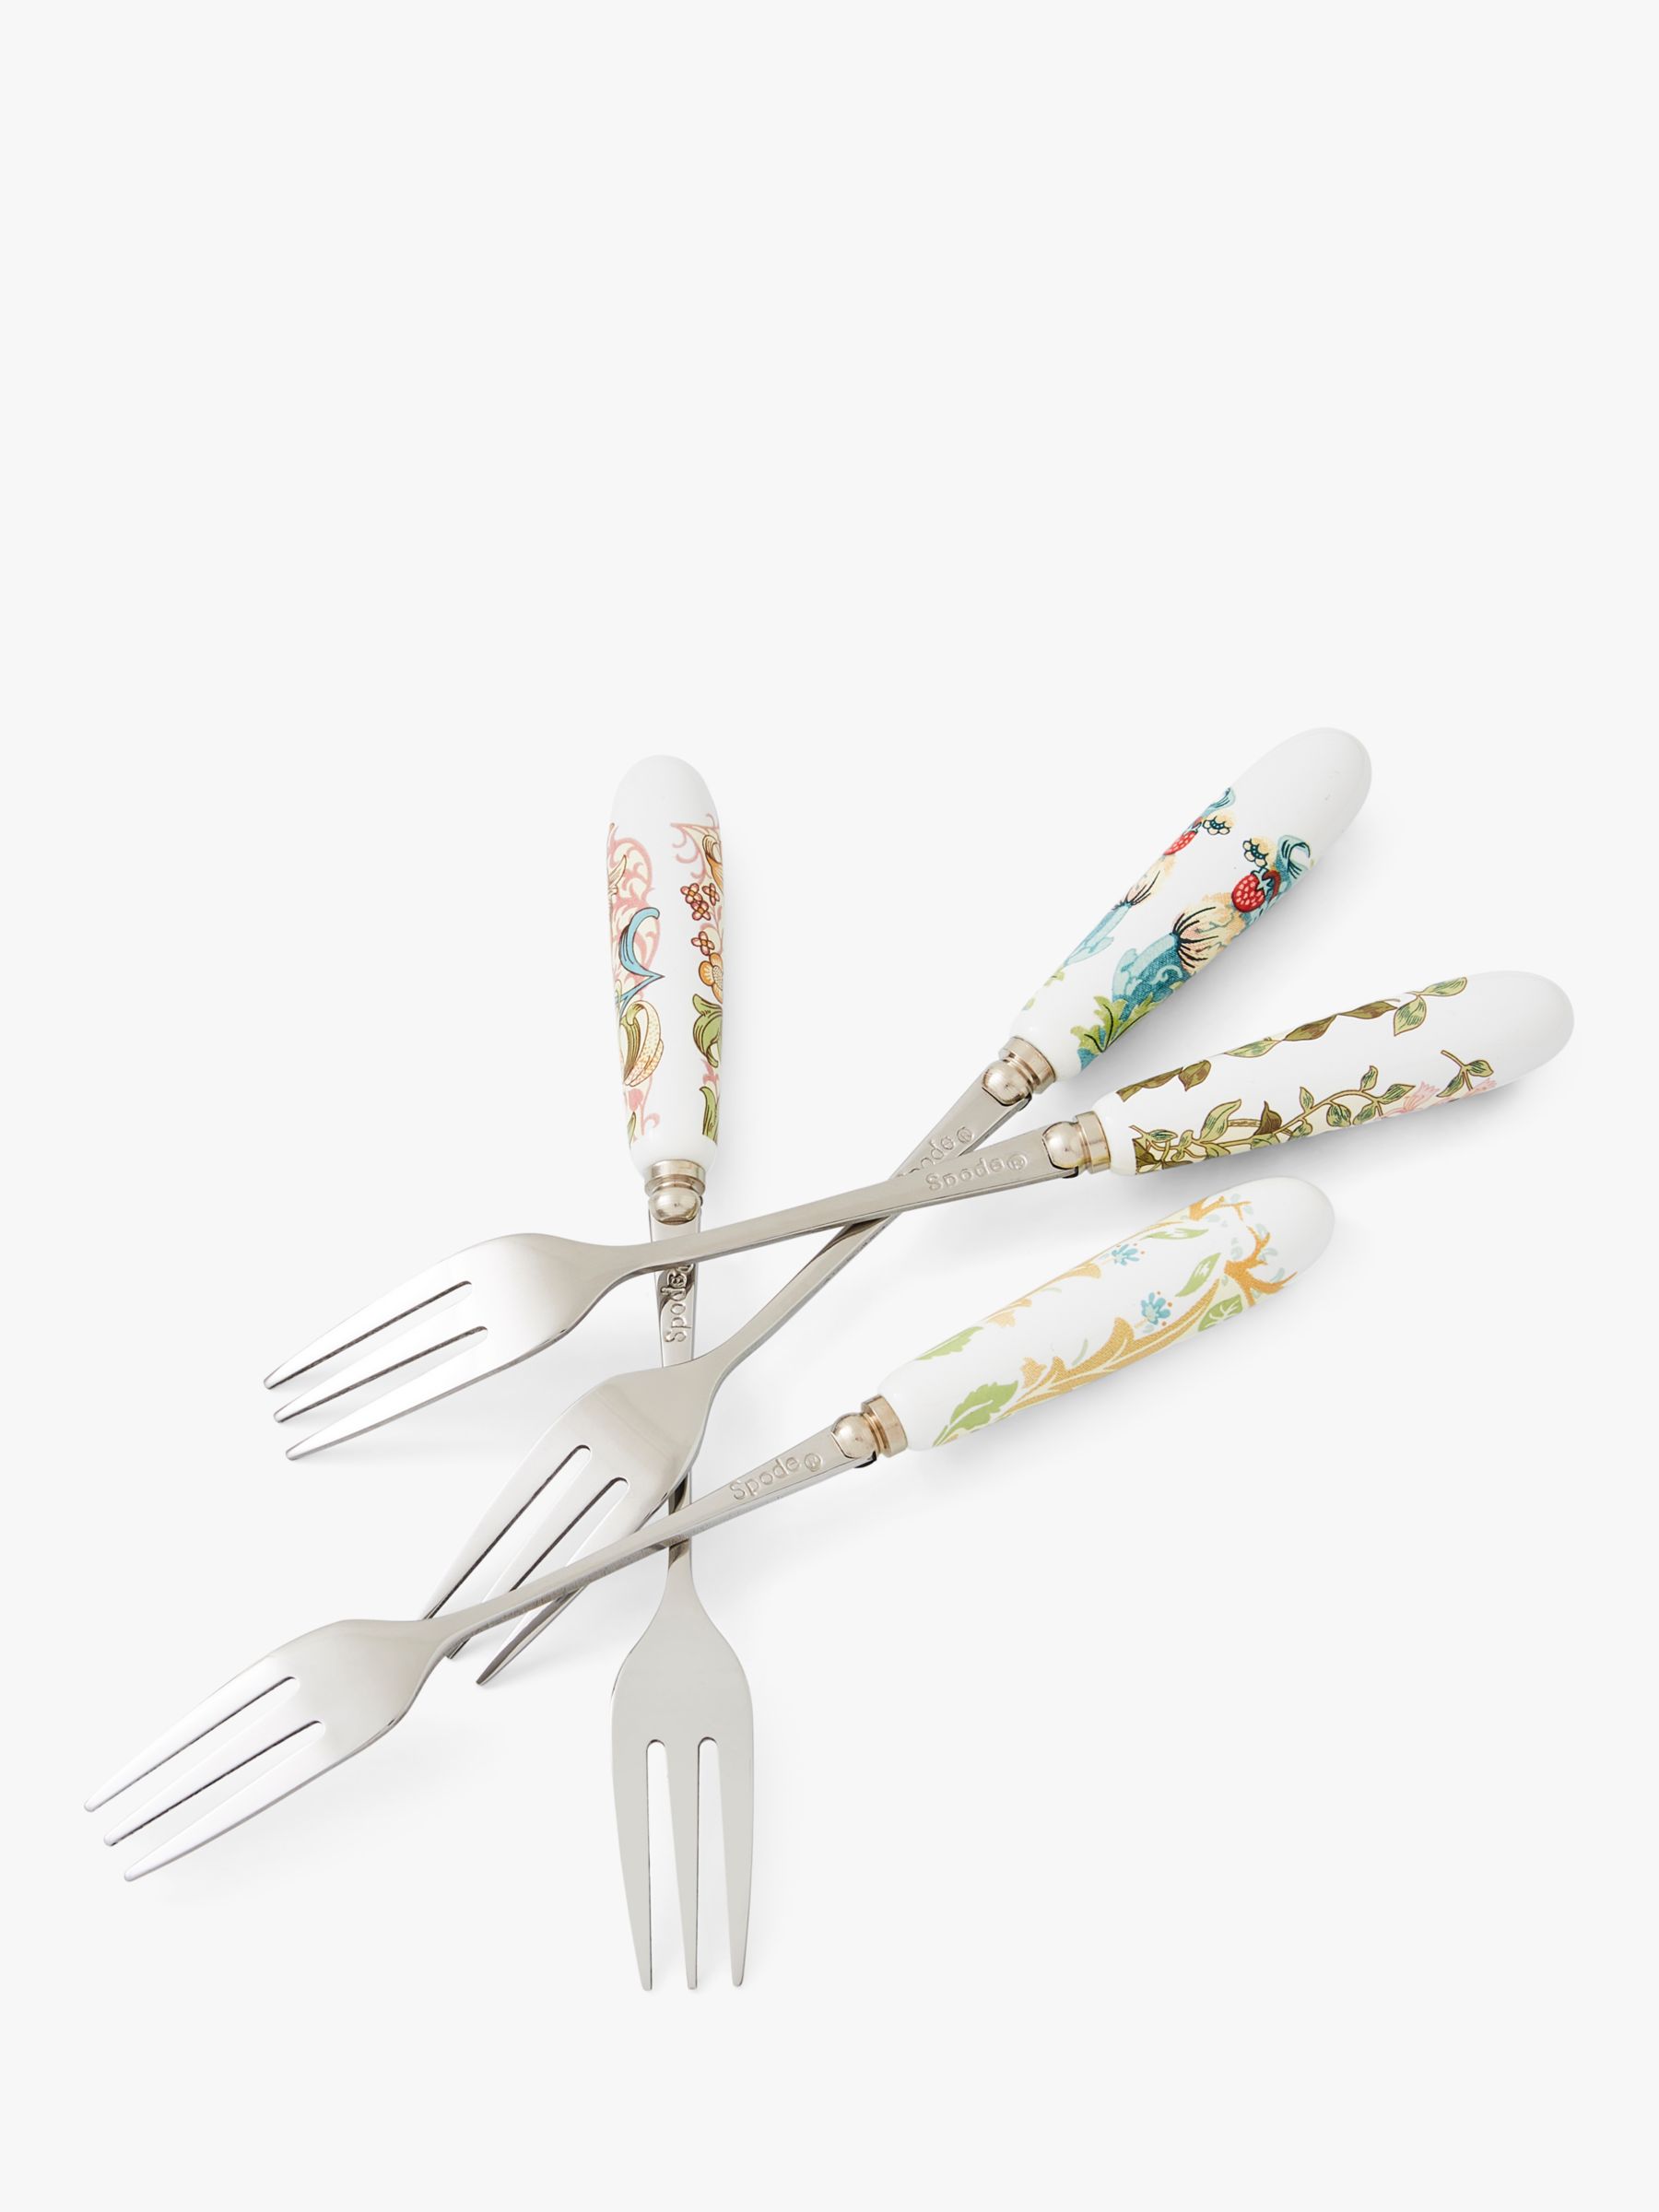 Honeysuckle Pastry Forks 4-pack  Cutlery & Kitchen accessories / Forks